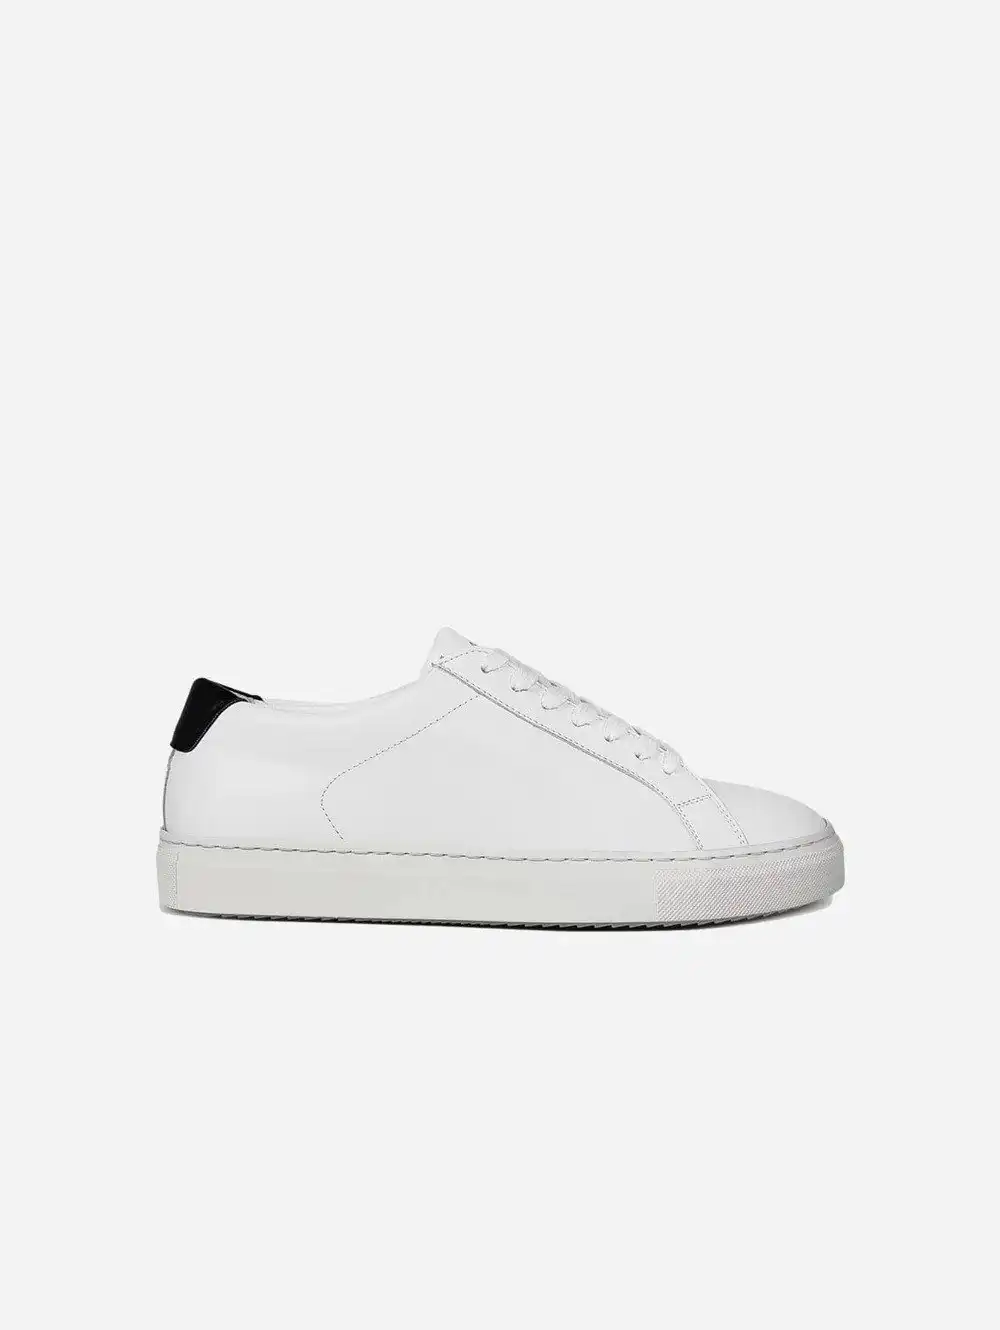 Humans Are Vain Tide V2 Sustainable Vegan Leather Trainer